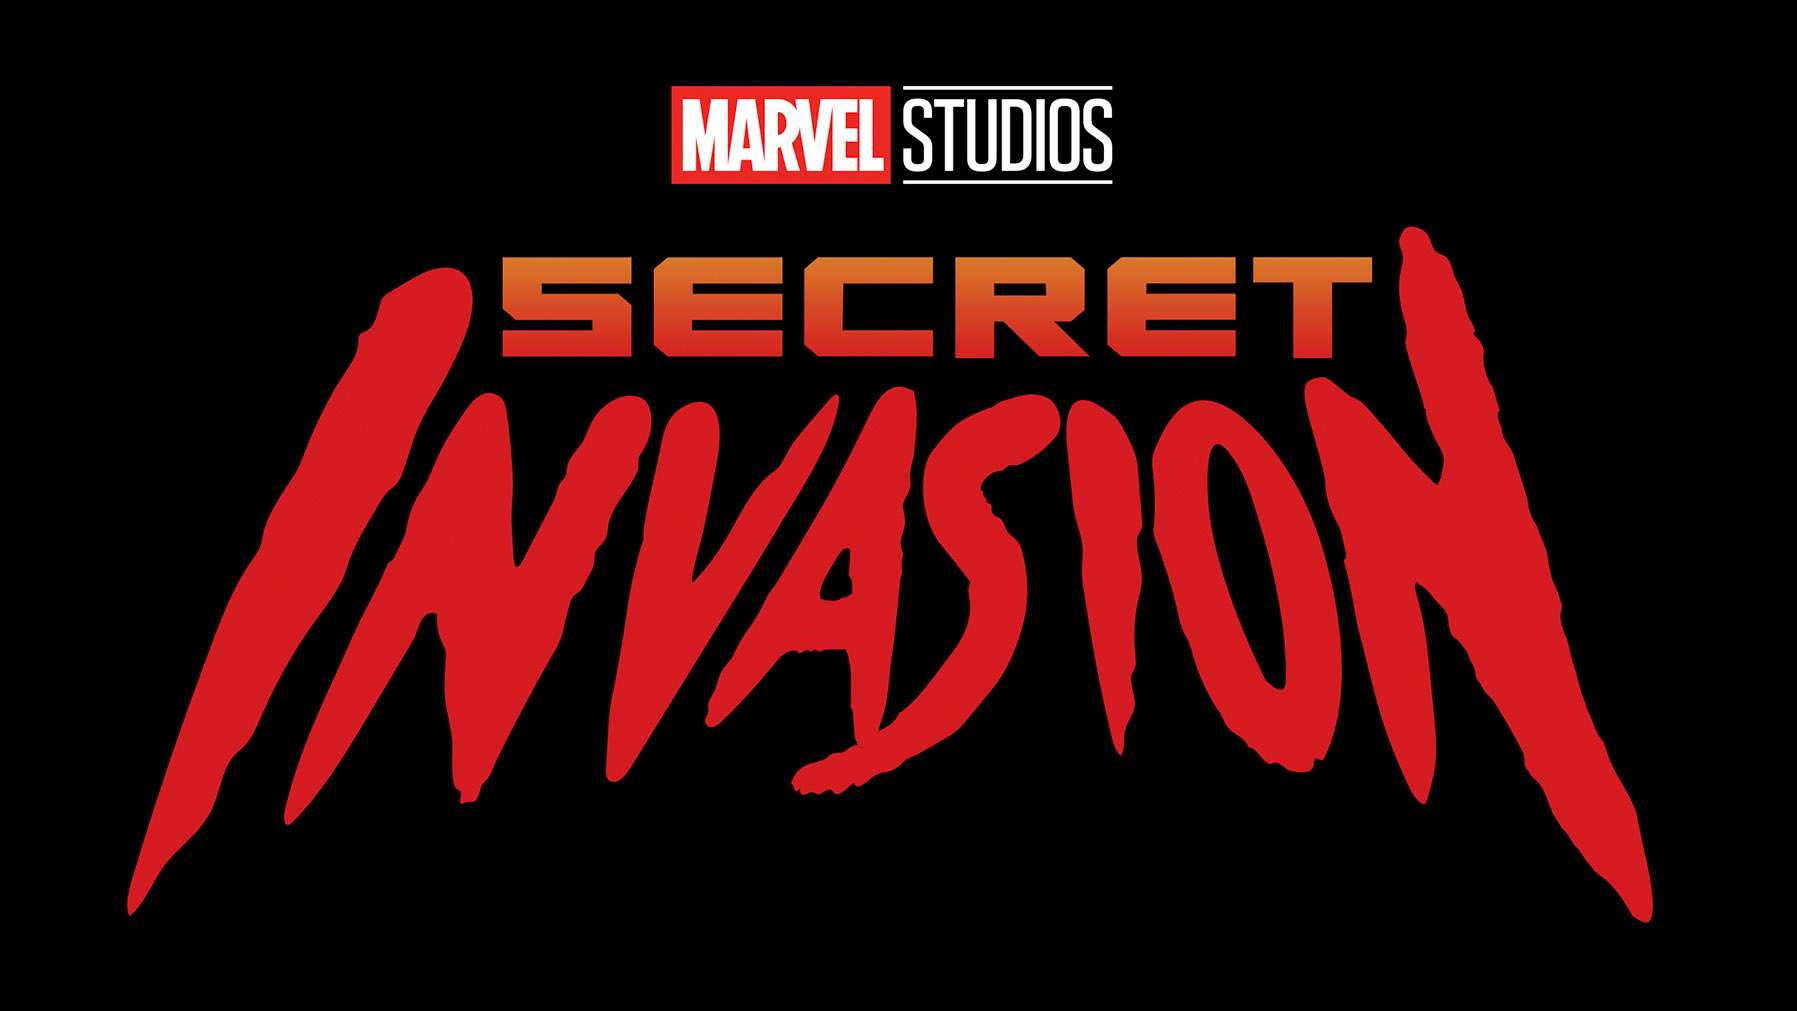 The official logo for the Secret Invasions Disney Plus series